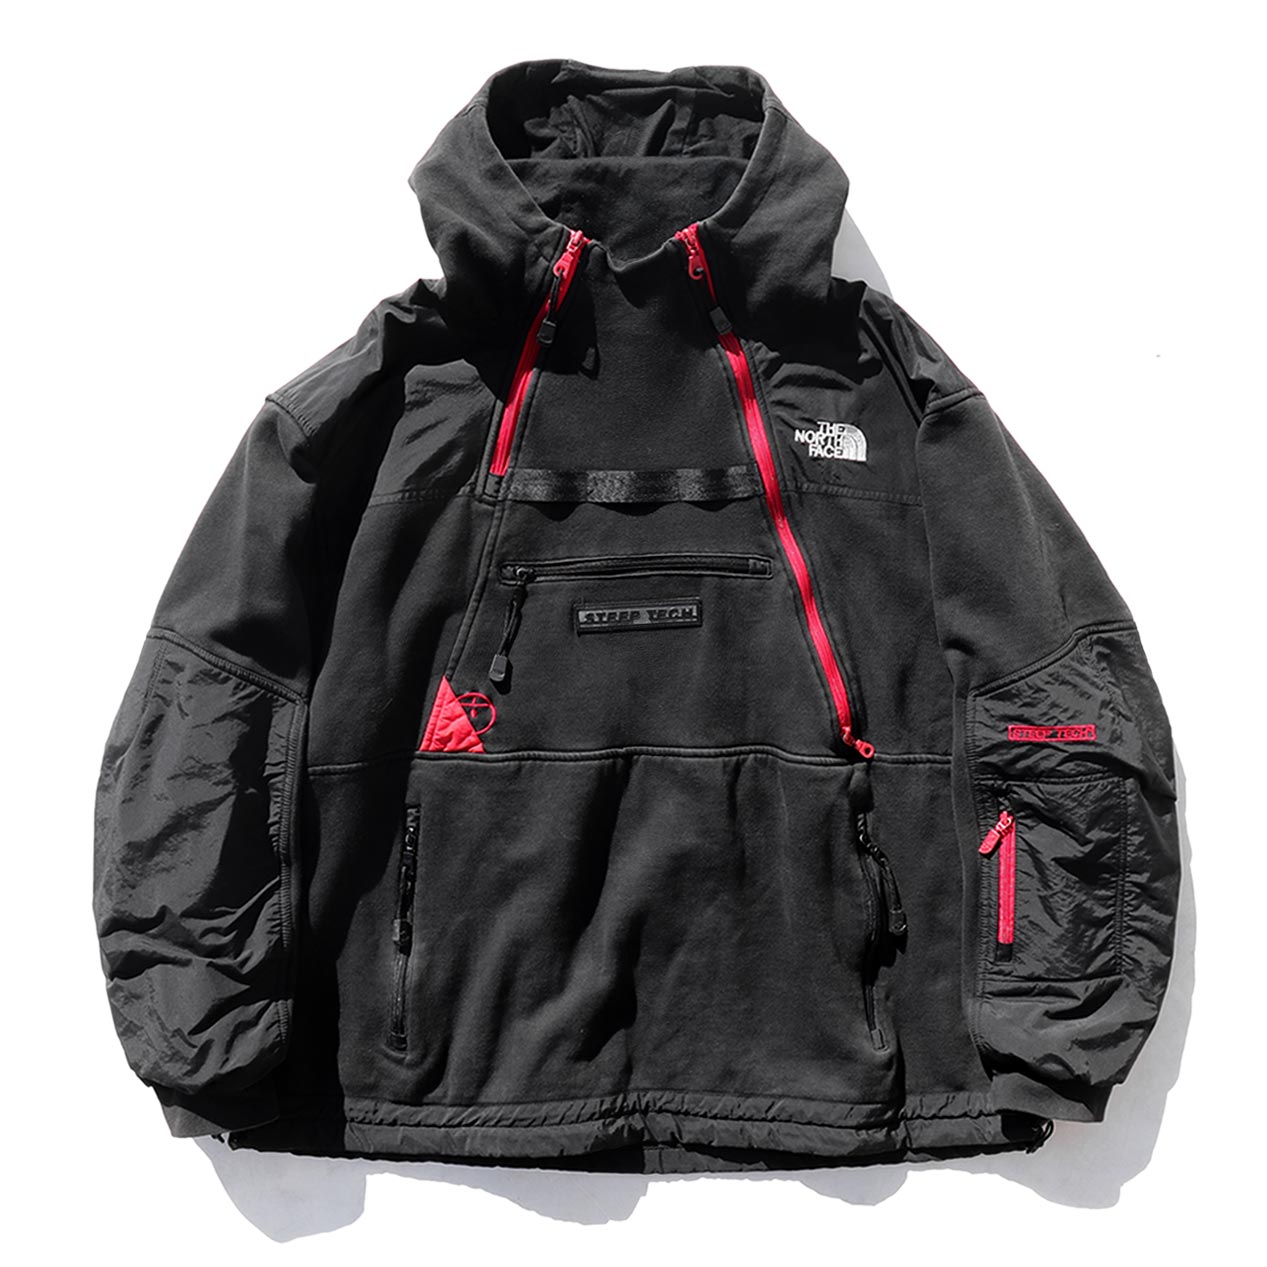 POST JUNK / 90's THE NORTH FACE “BLACK SWEAT” Steep Tech Hooded 